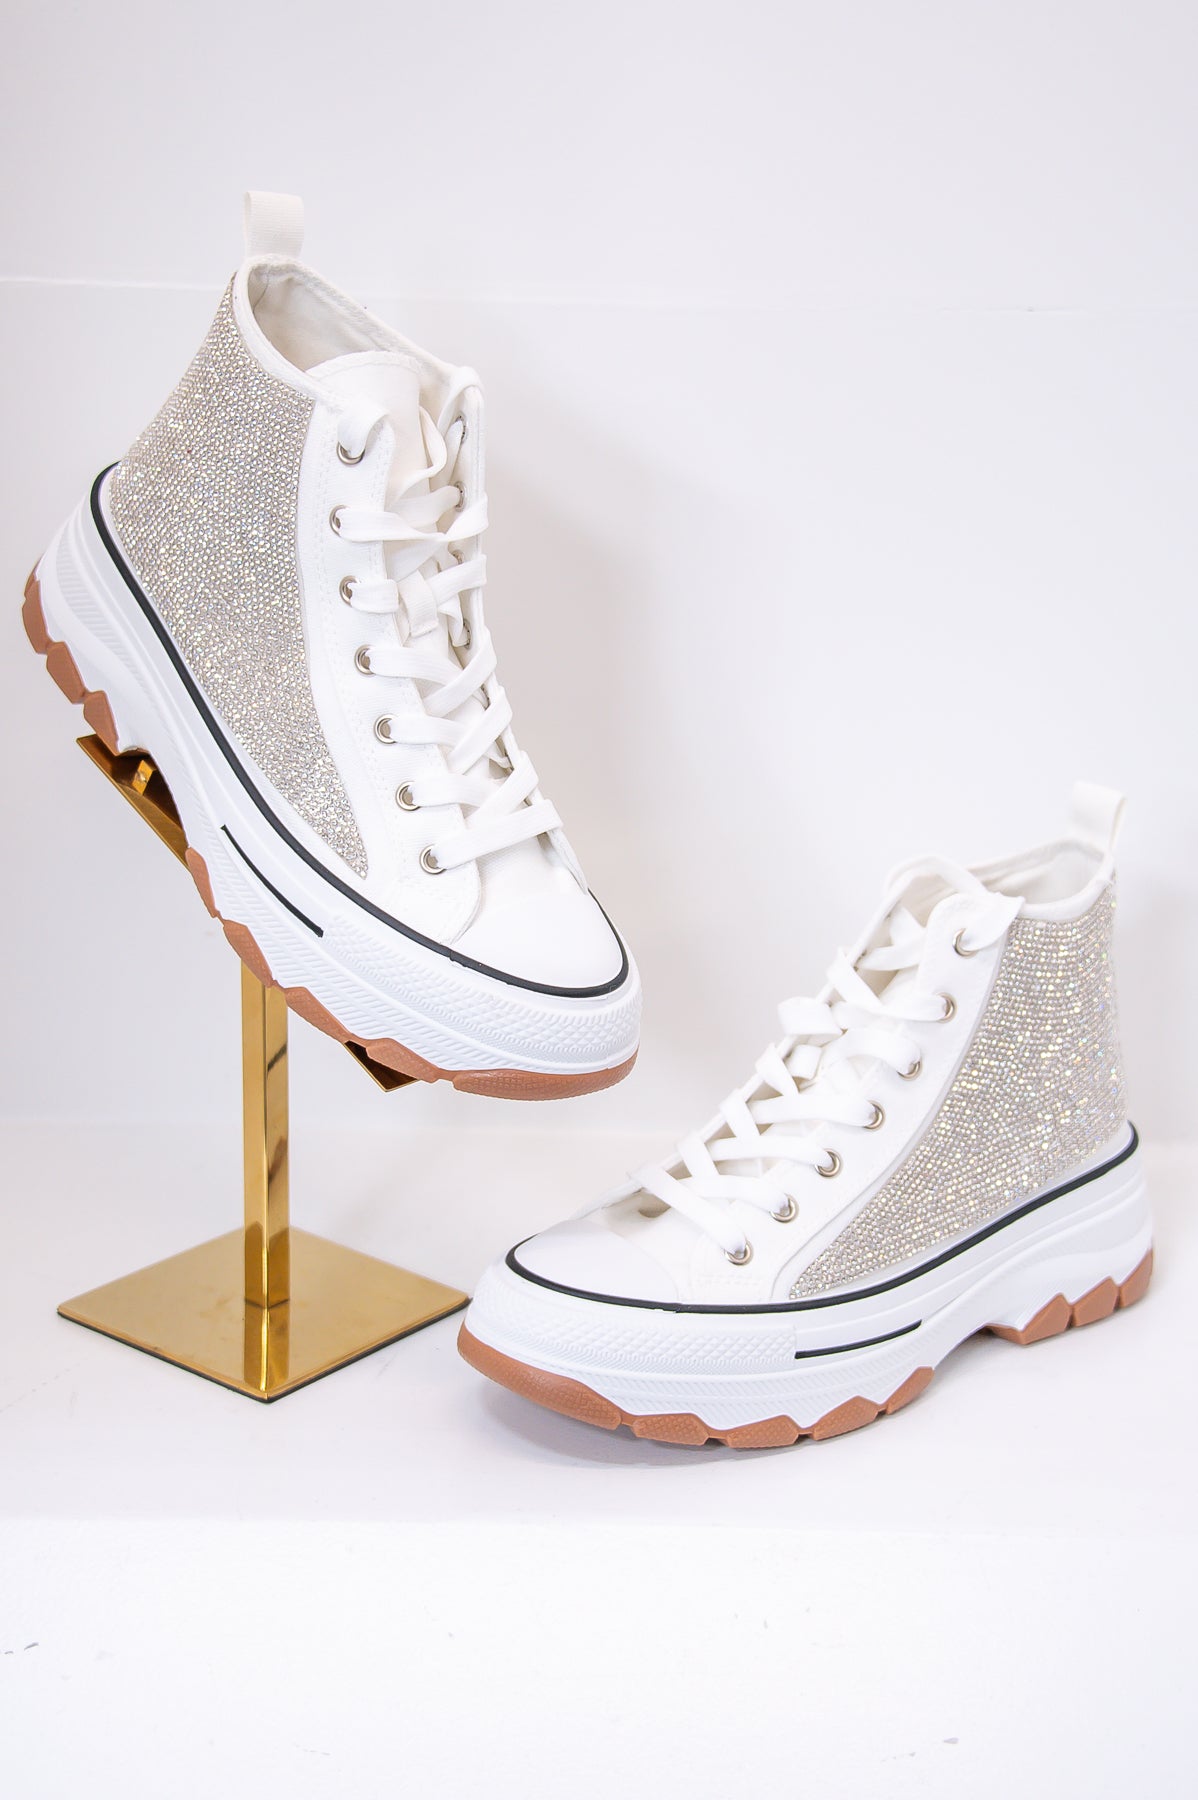 Successfully Stylin' White/Silver Bling Platform Sneakers - SHO2661WH